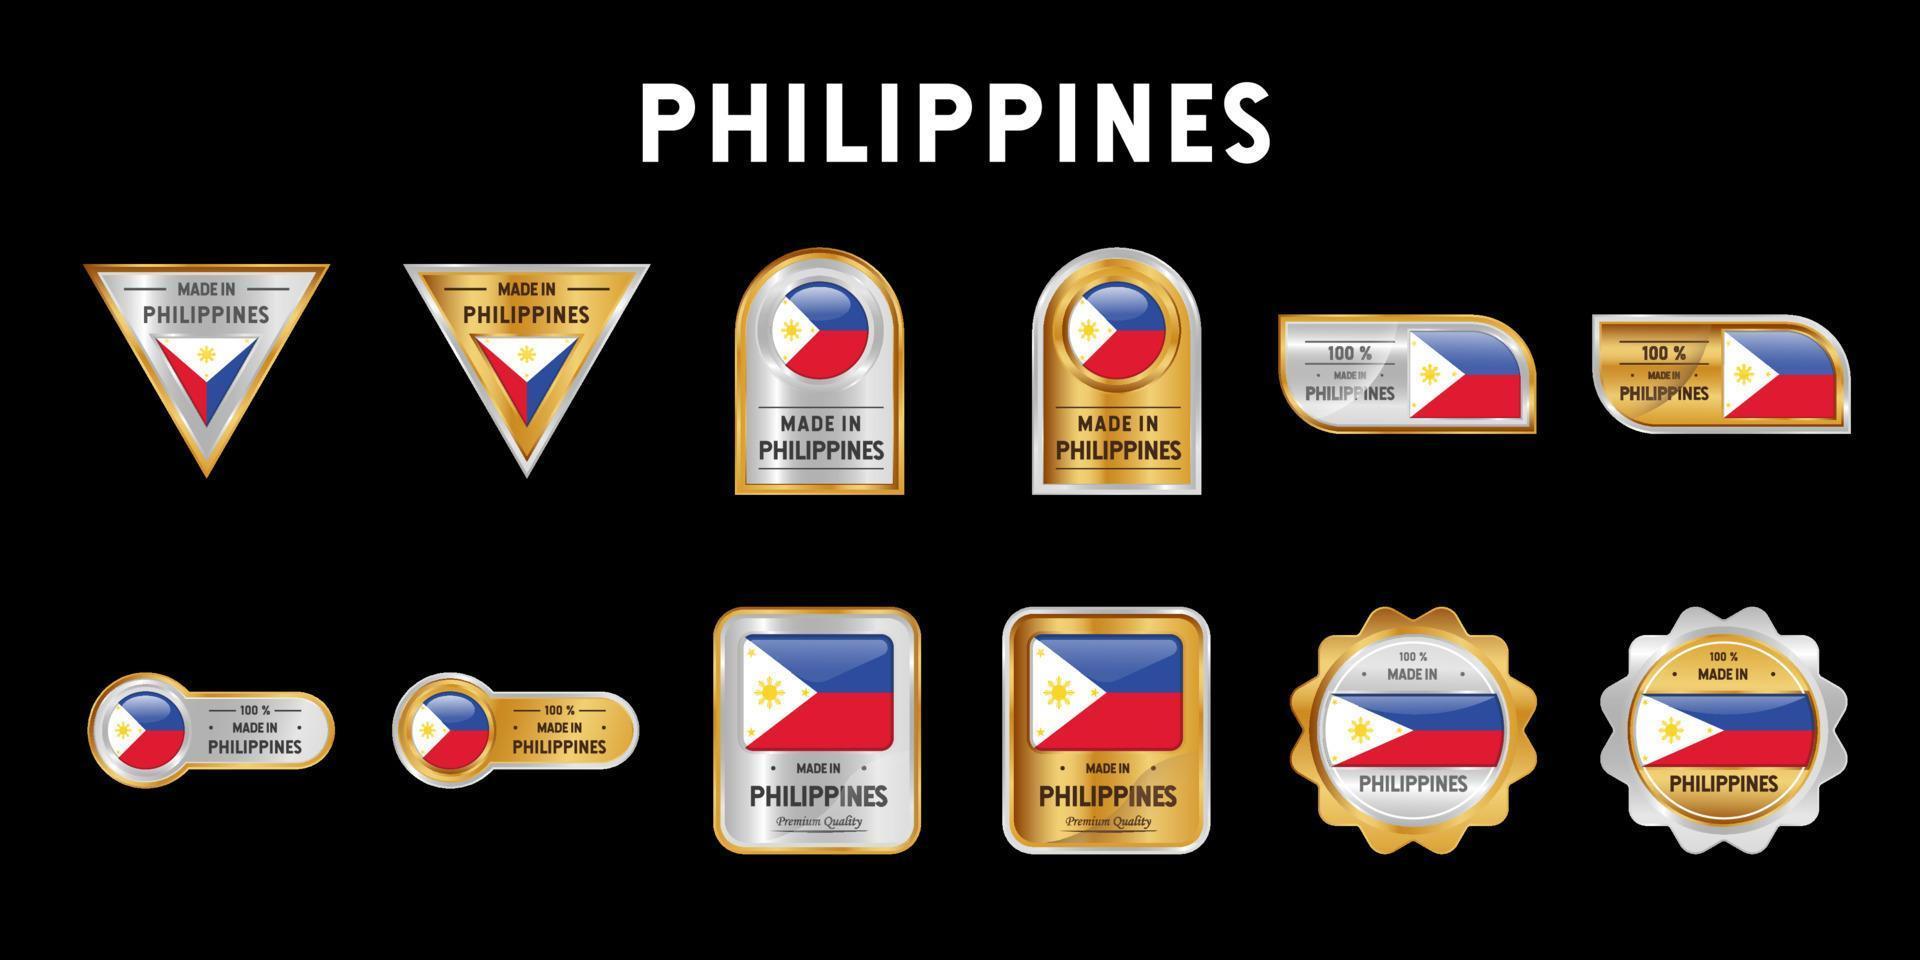 Made in Philippines Label, Stamp, Badge, or Logo. With The National Flag of Philippines. On platinum, gold, and silver colors. Premium and Luxury Emblem vector